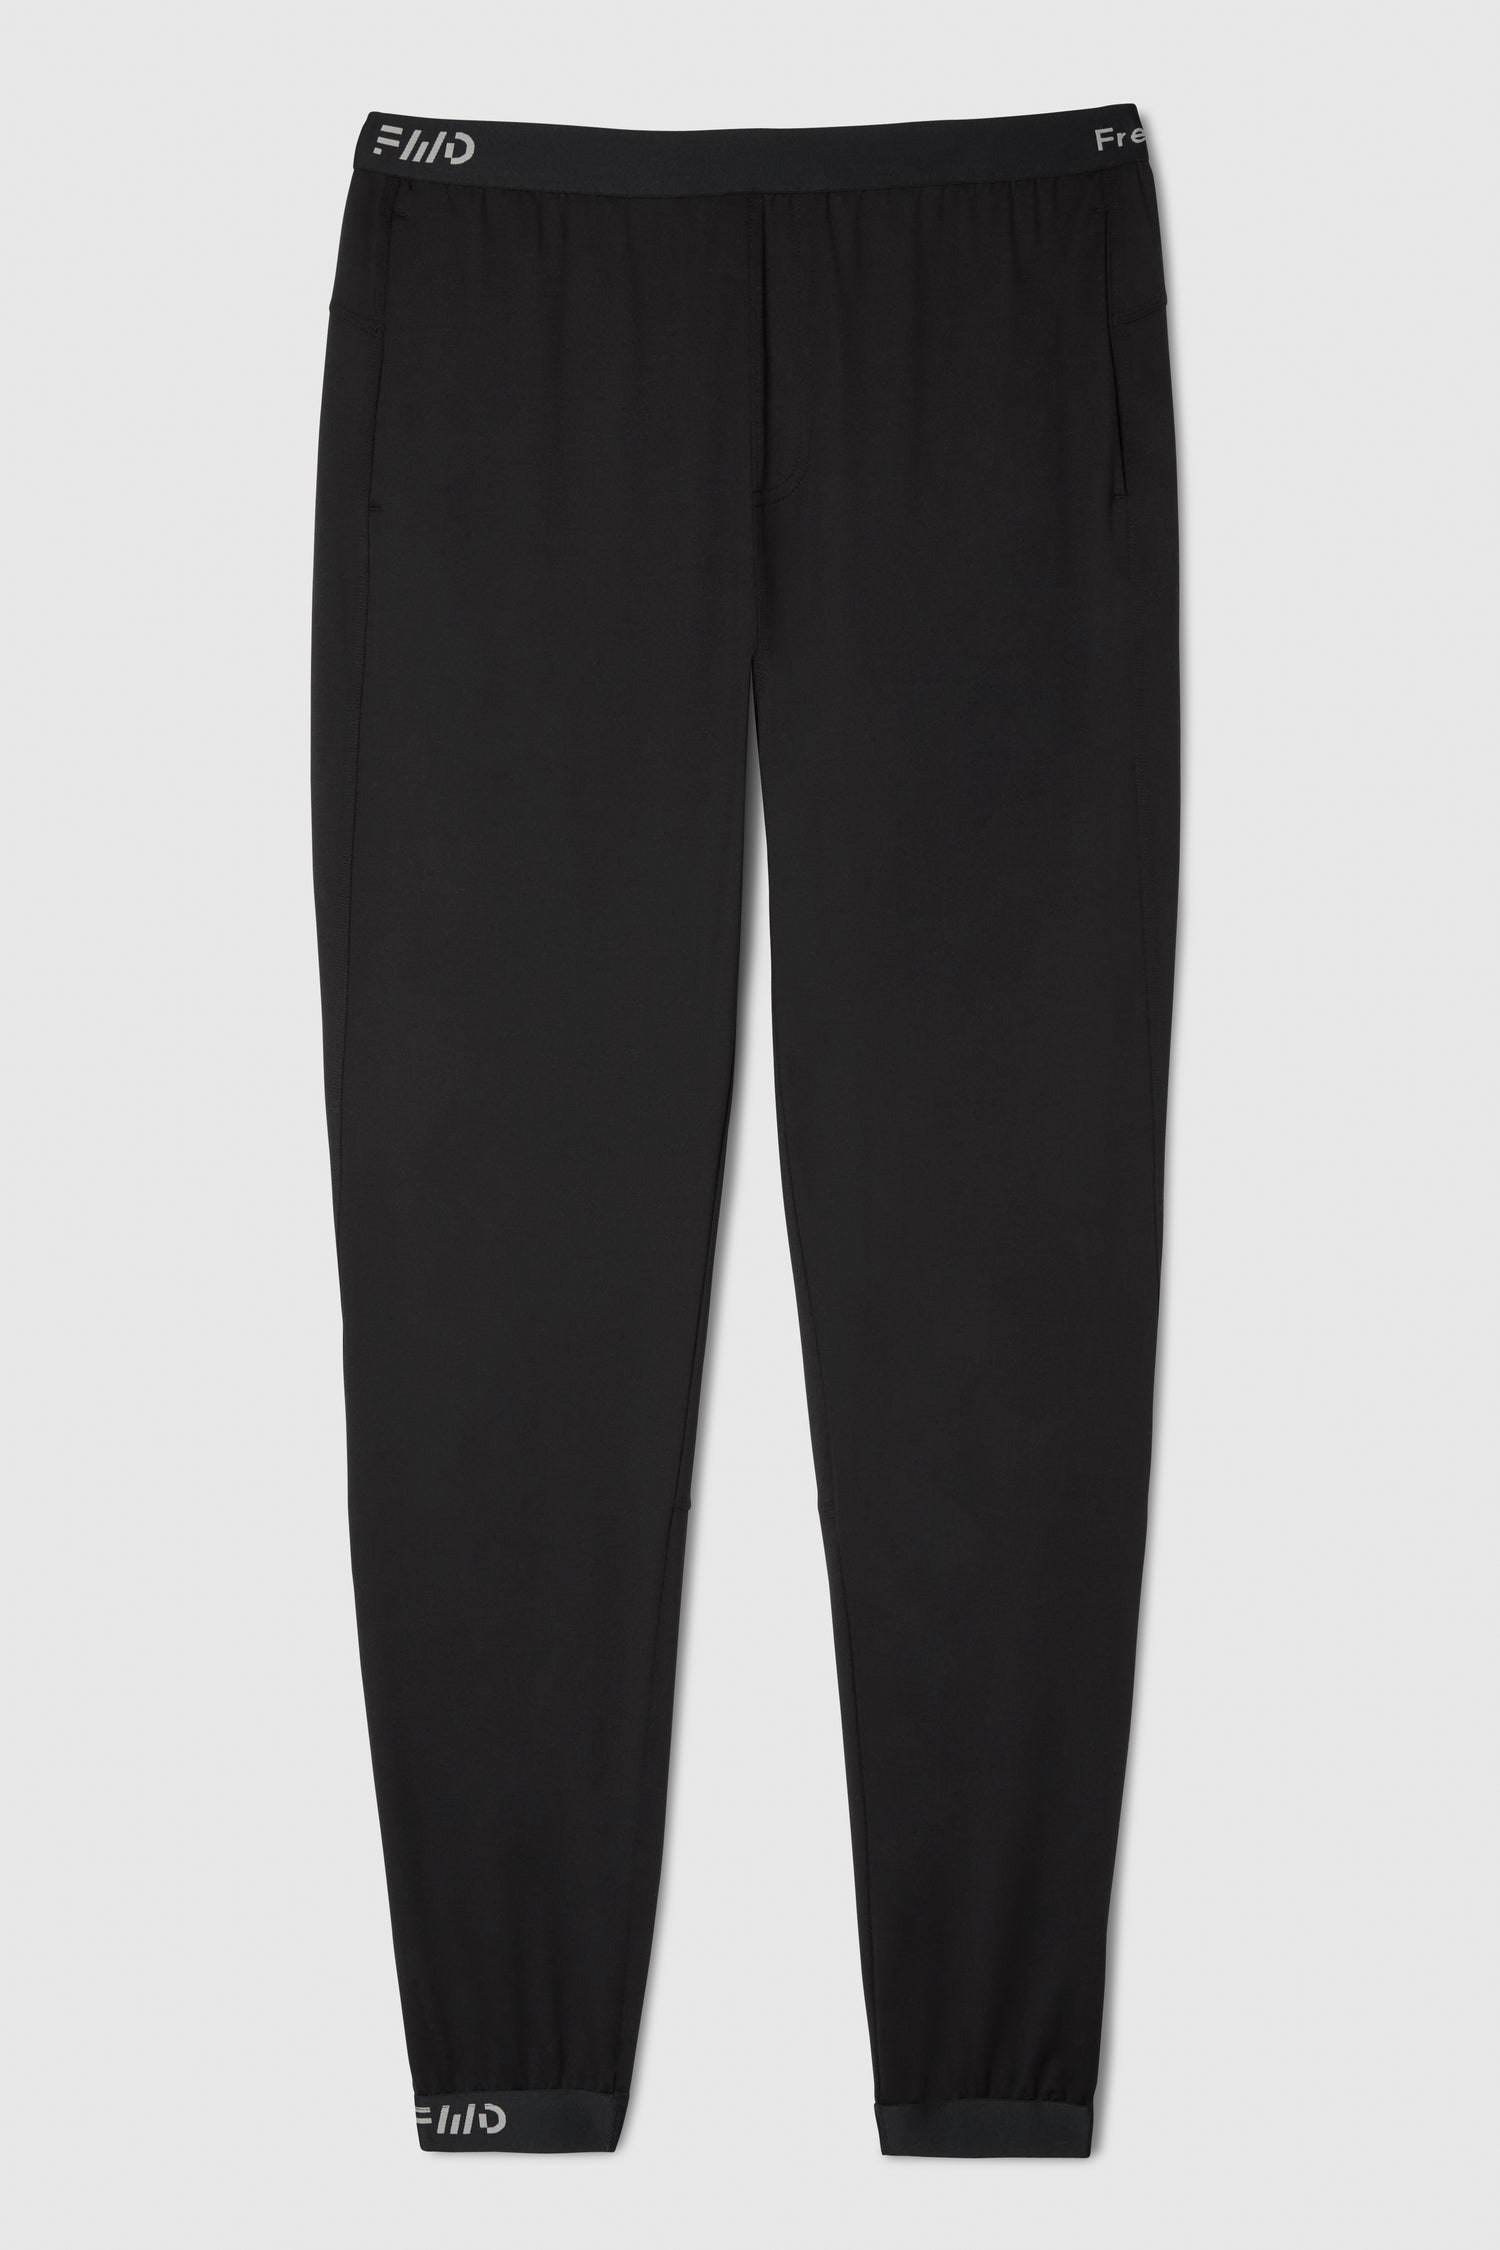 Free FWD Men's All Day Lounge Jogger